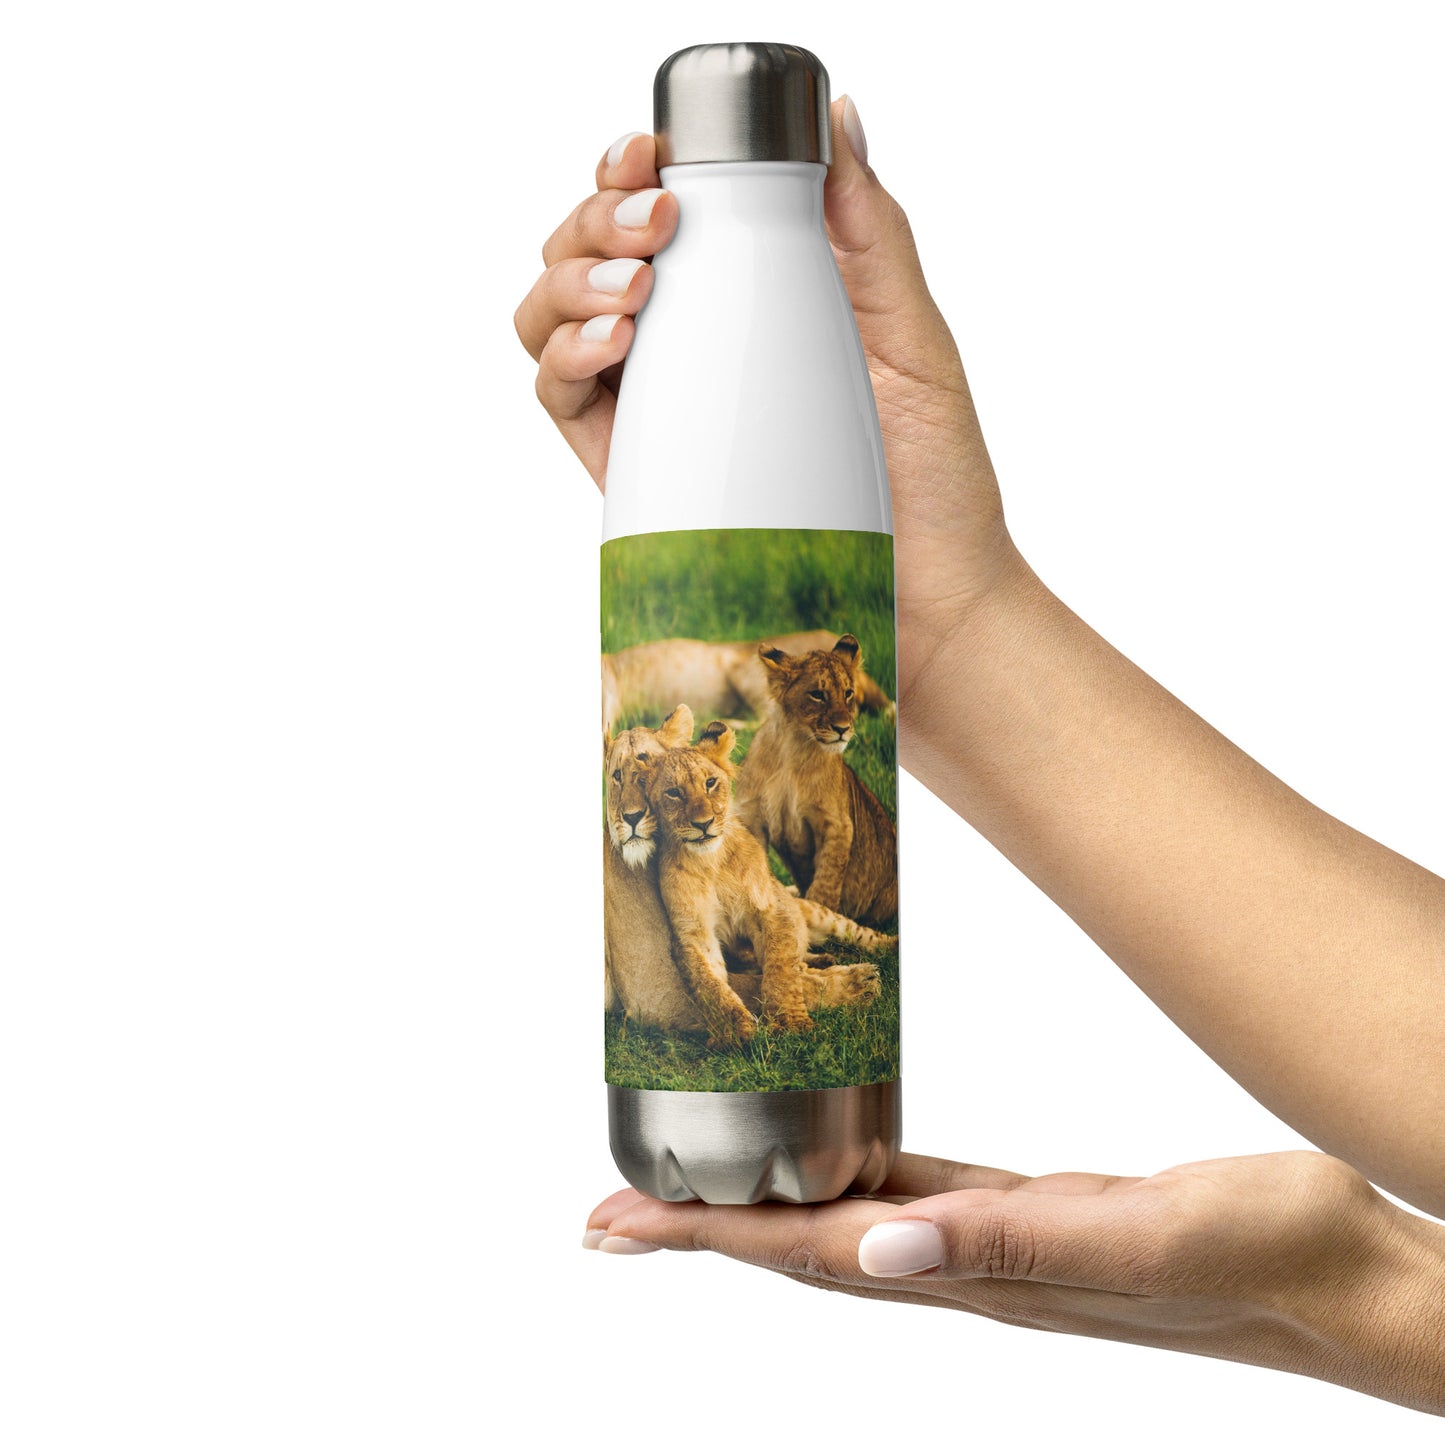 HydroSteel: Premium Stainless Steel Water Bottle - Durable, Insulated, and Stylish with Lion Family Print Design